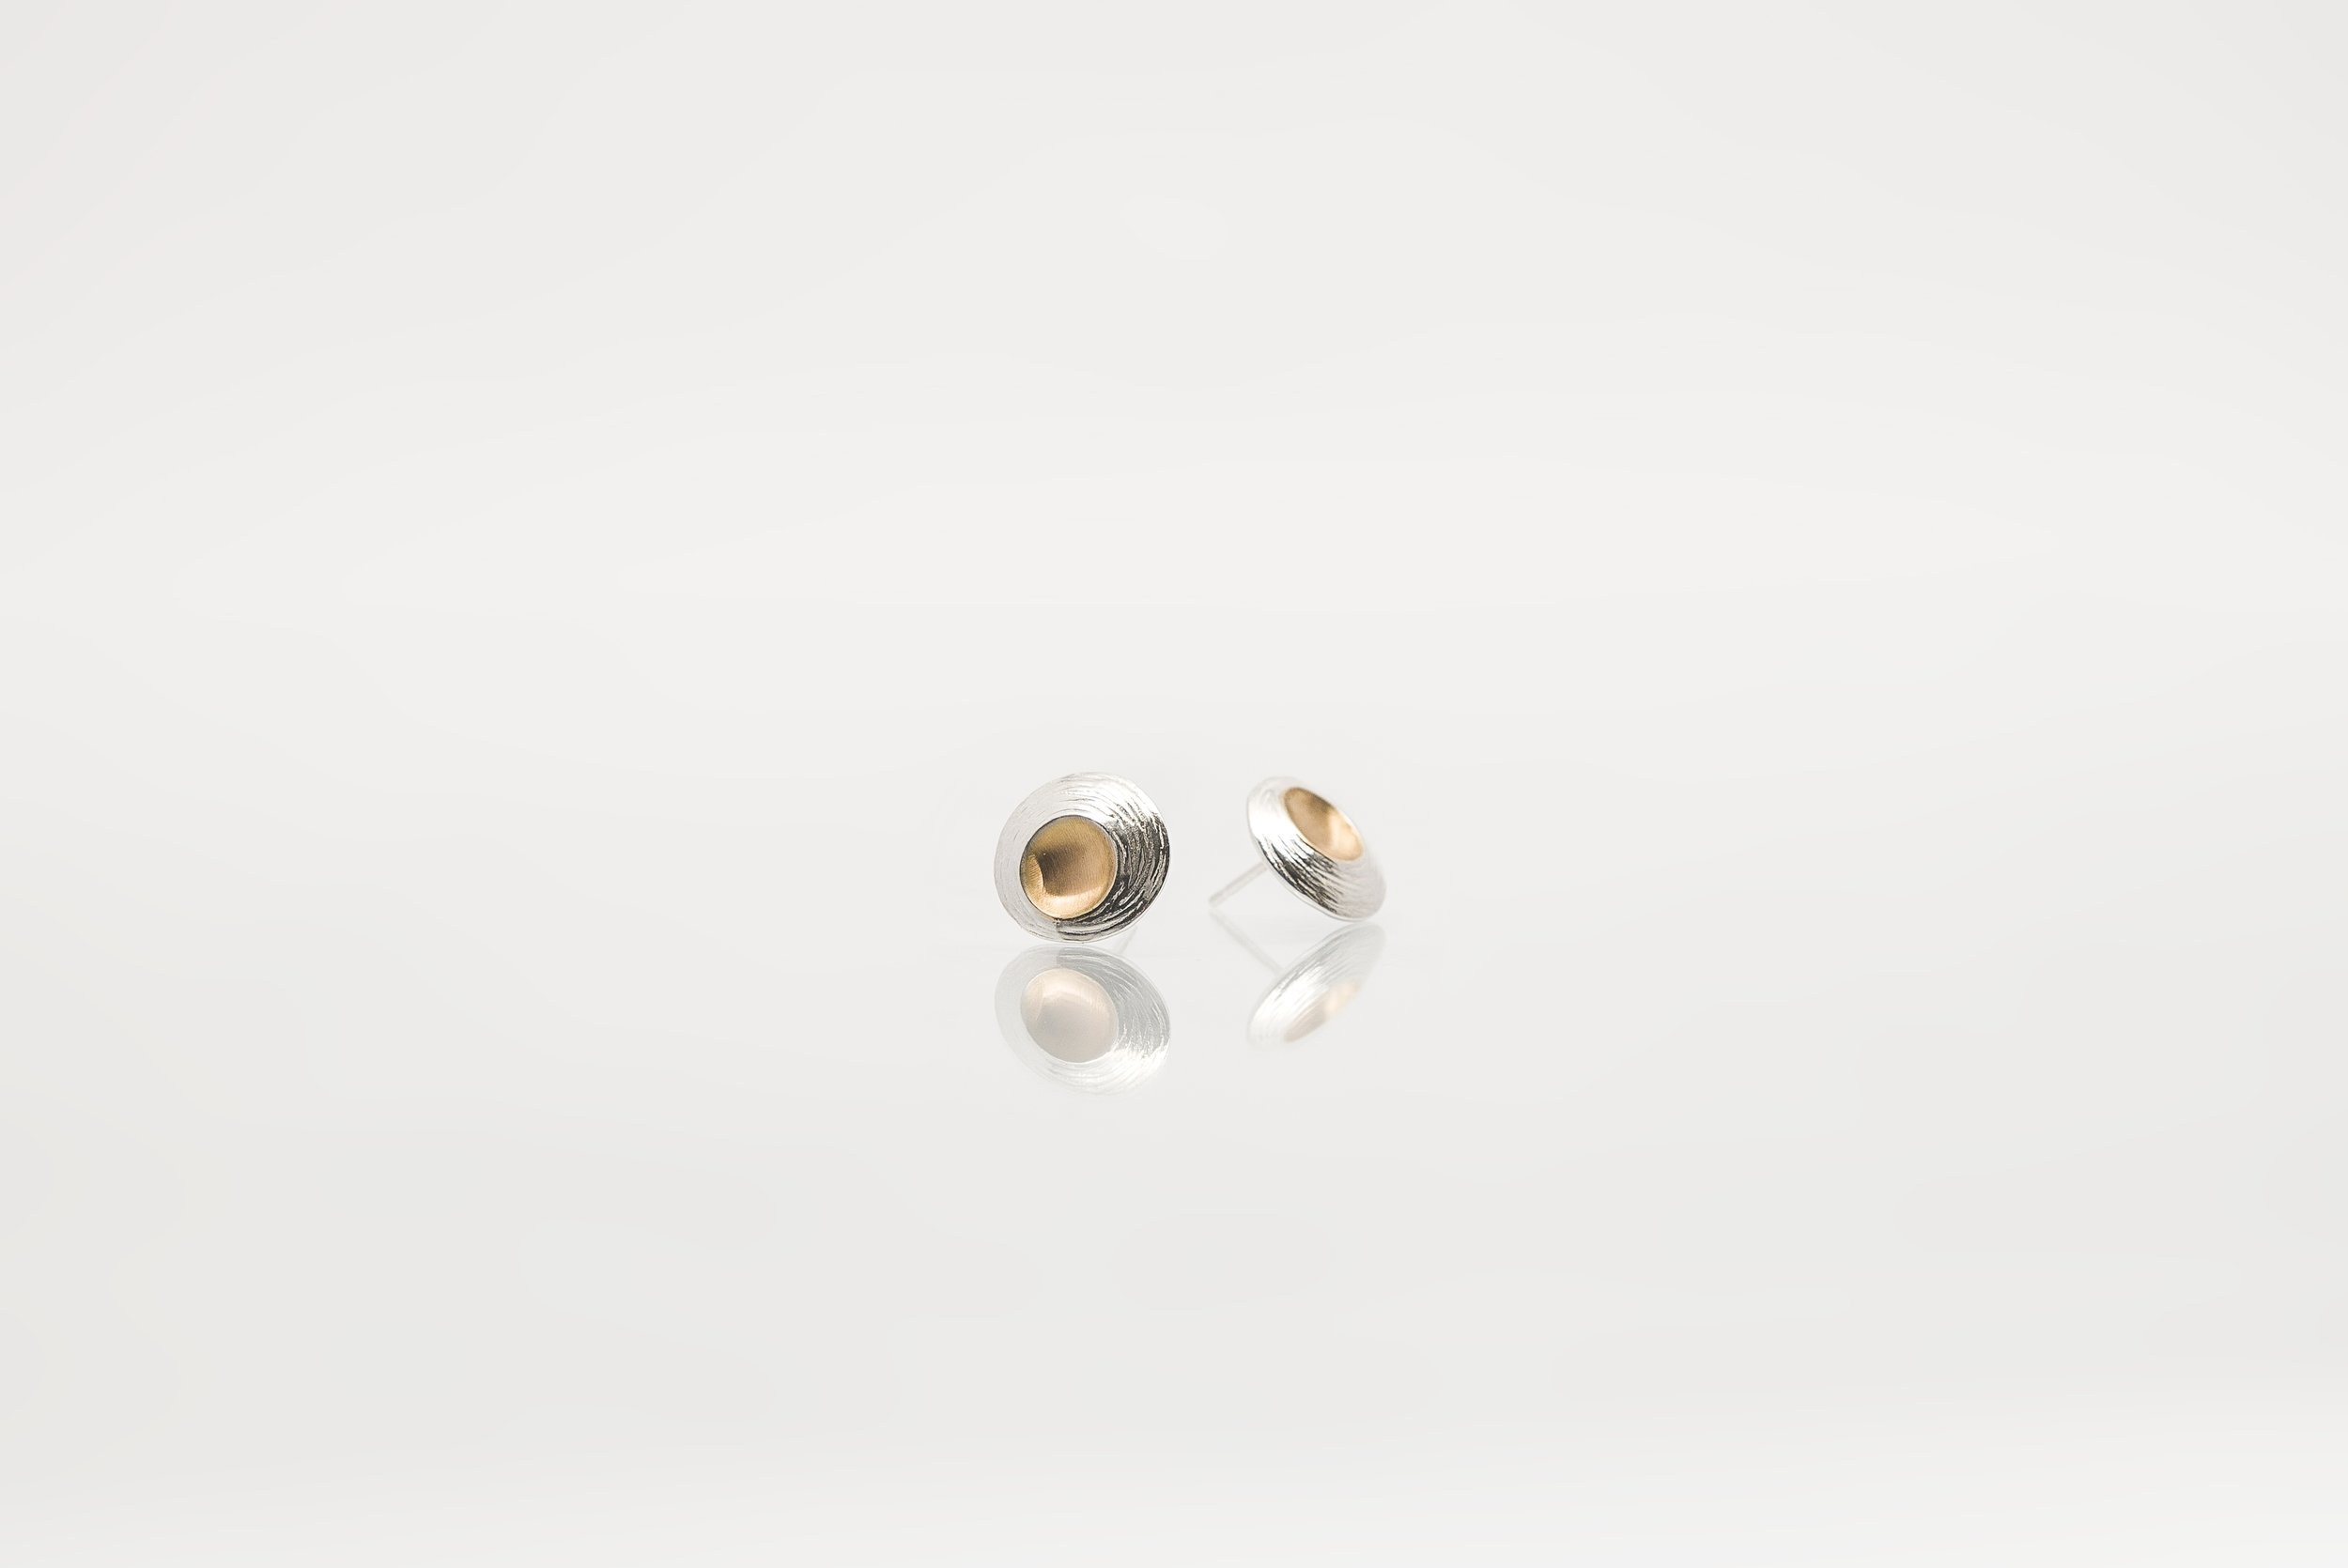 Martina Hamilton Moonshell Collection Stud Earrings in hallmarked sterling silver with 22 carat hand gold plated detail.